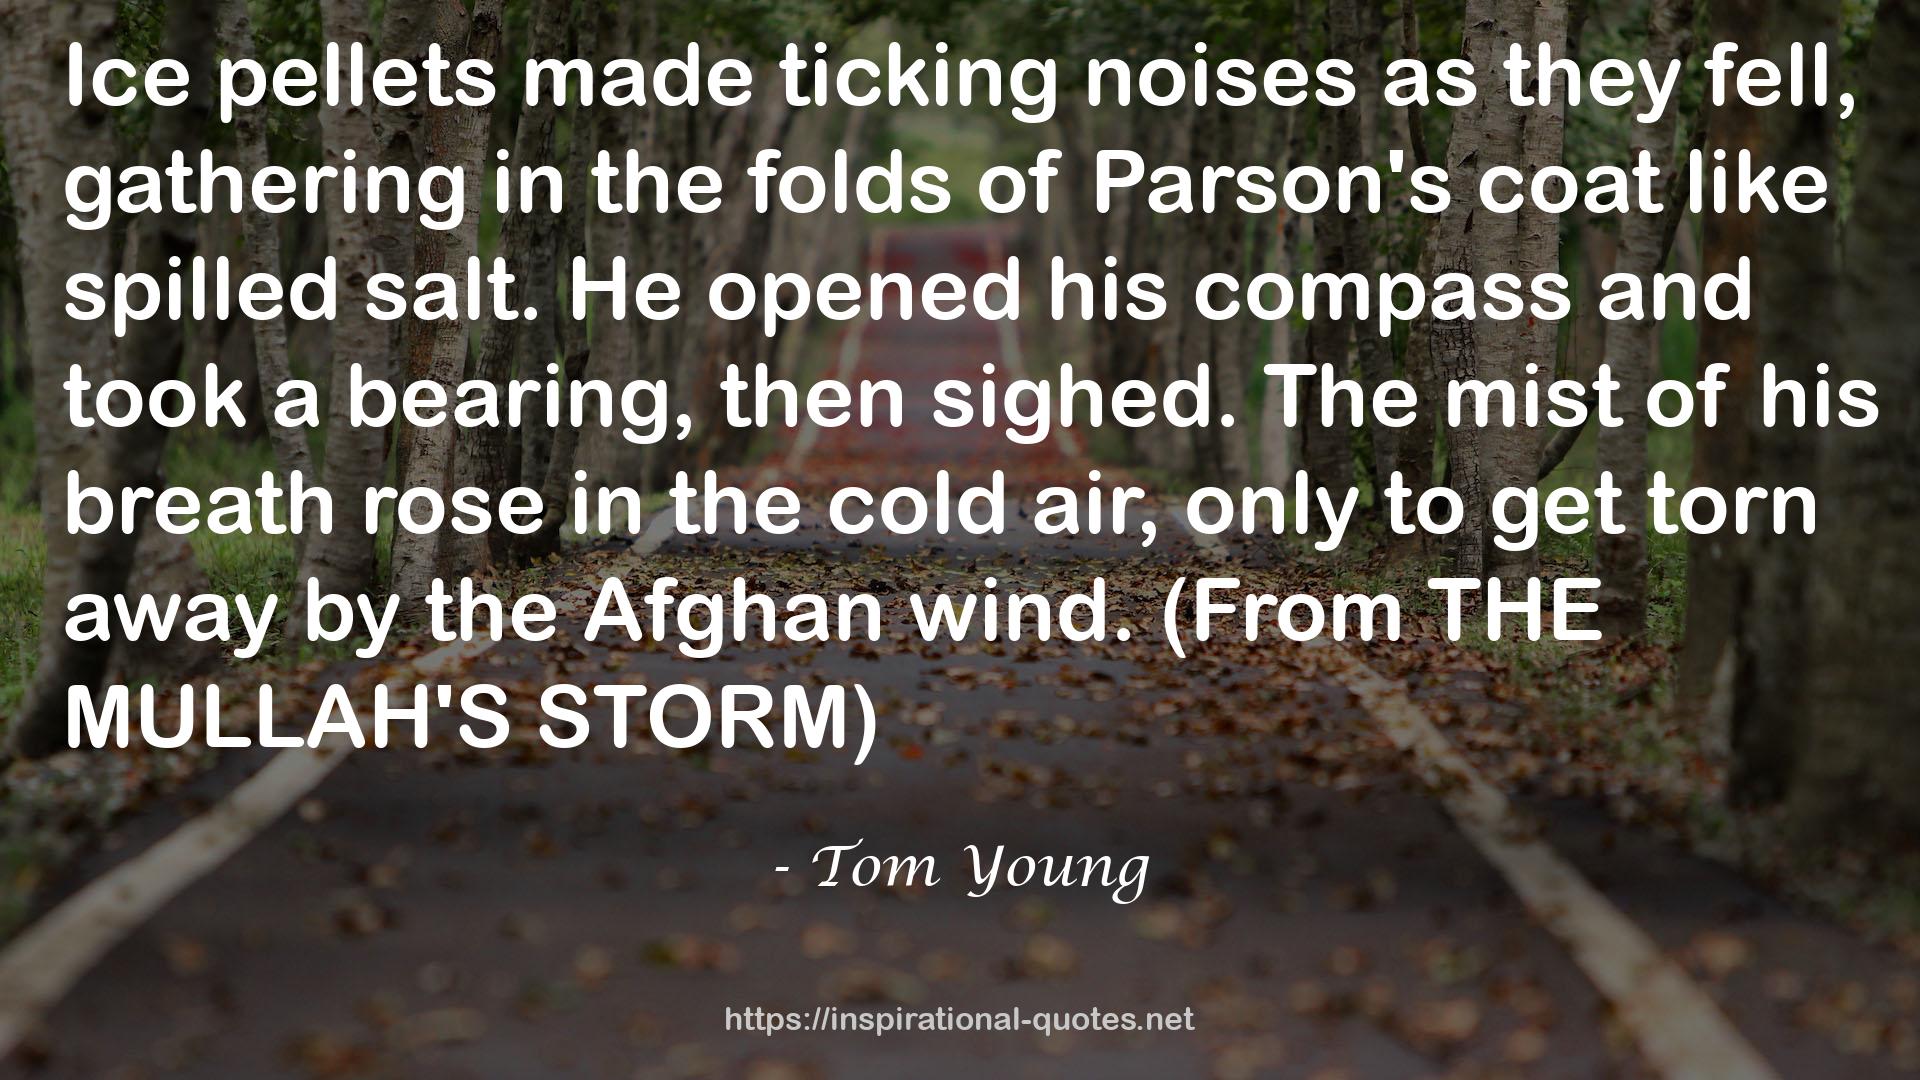 Tom Young QUOTES